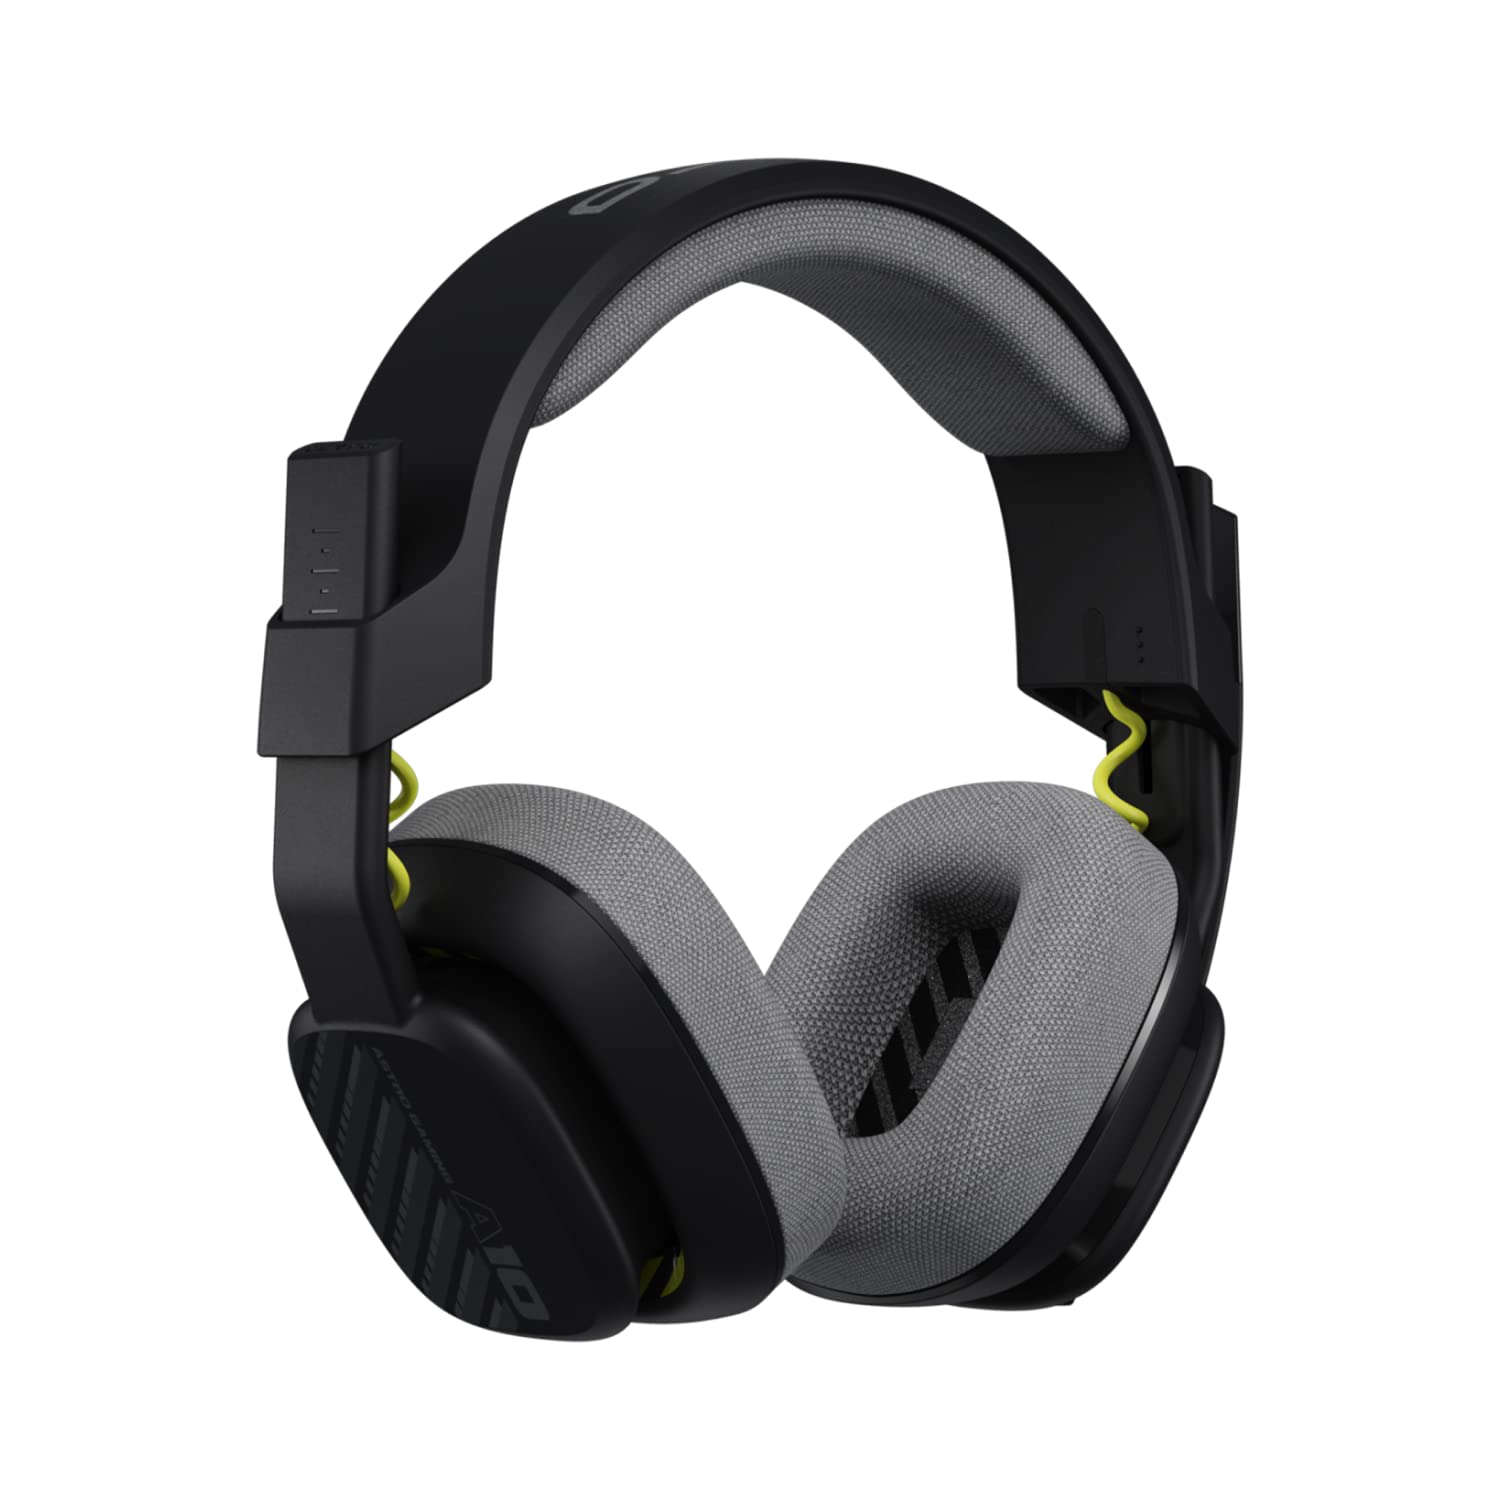 Astro A10 Gen 2 Wired Stereo Over-the-Ear Gaming Headset - Black (New)